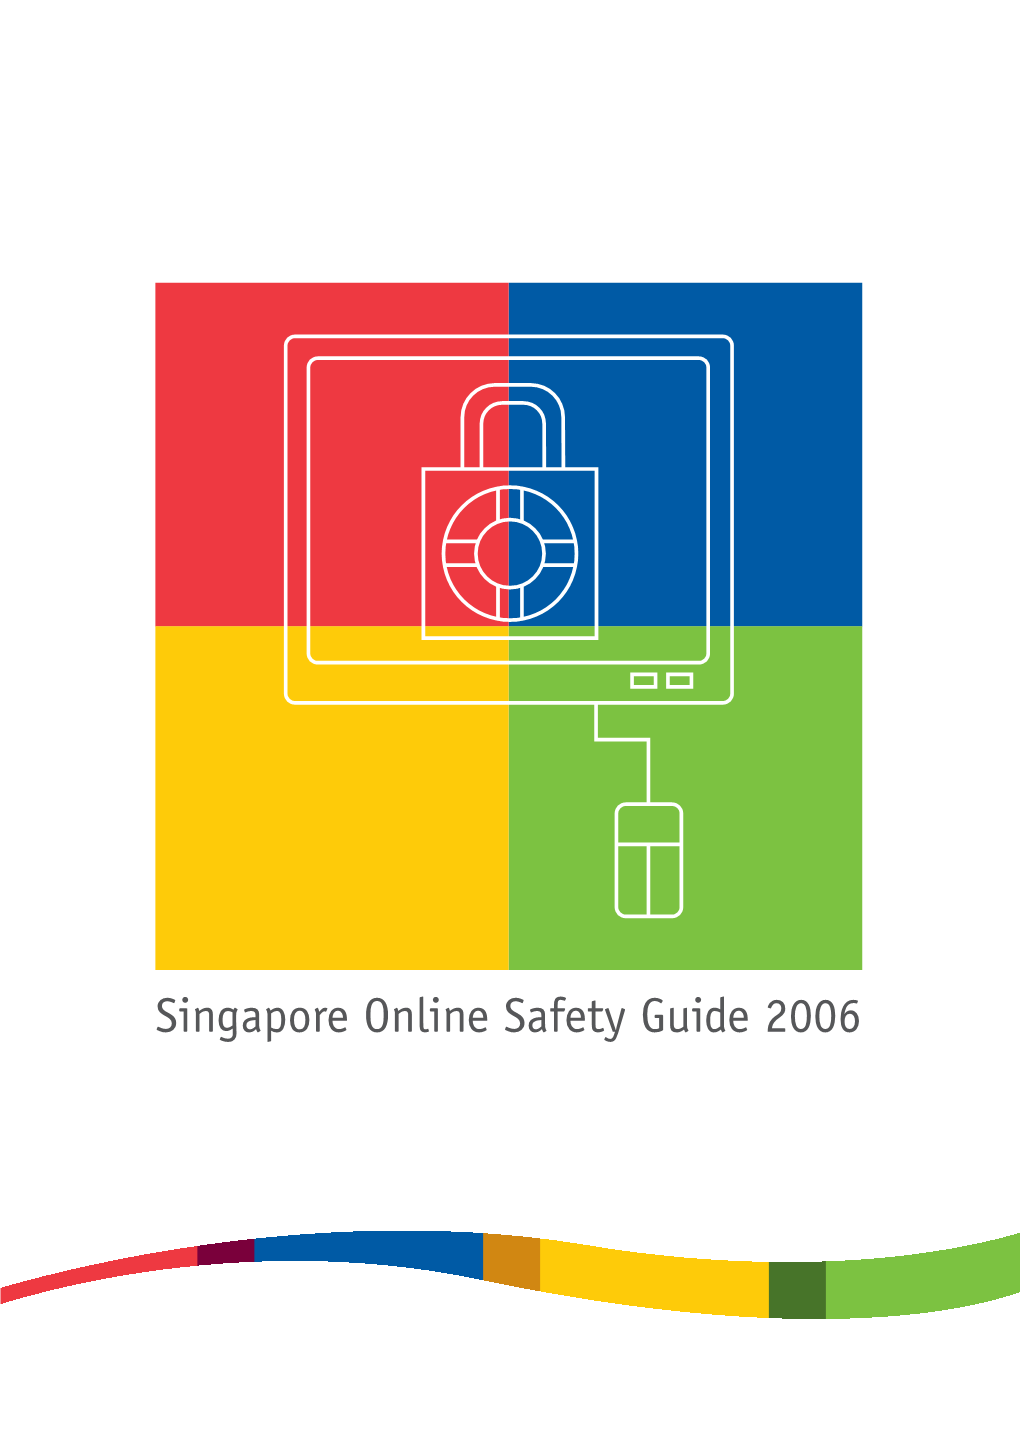 Internet Security 30 • Laws That Affect Online Transactions 31 • Getting Help 32 • Ebay Singapore’S Safe Trading Tips 33